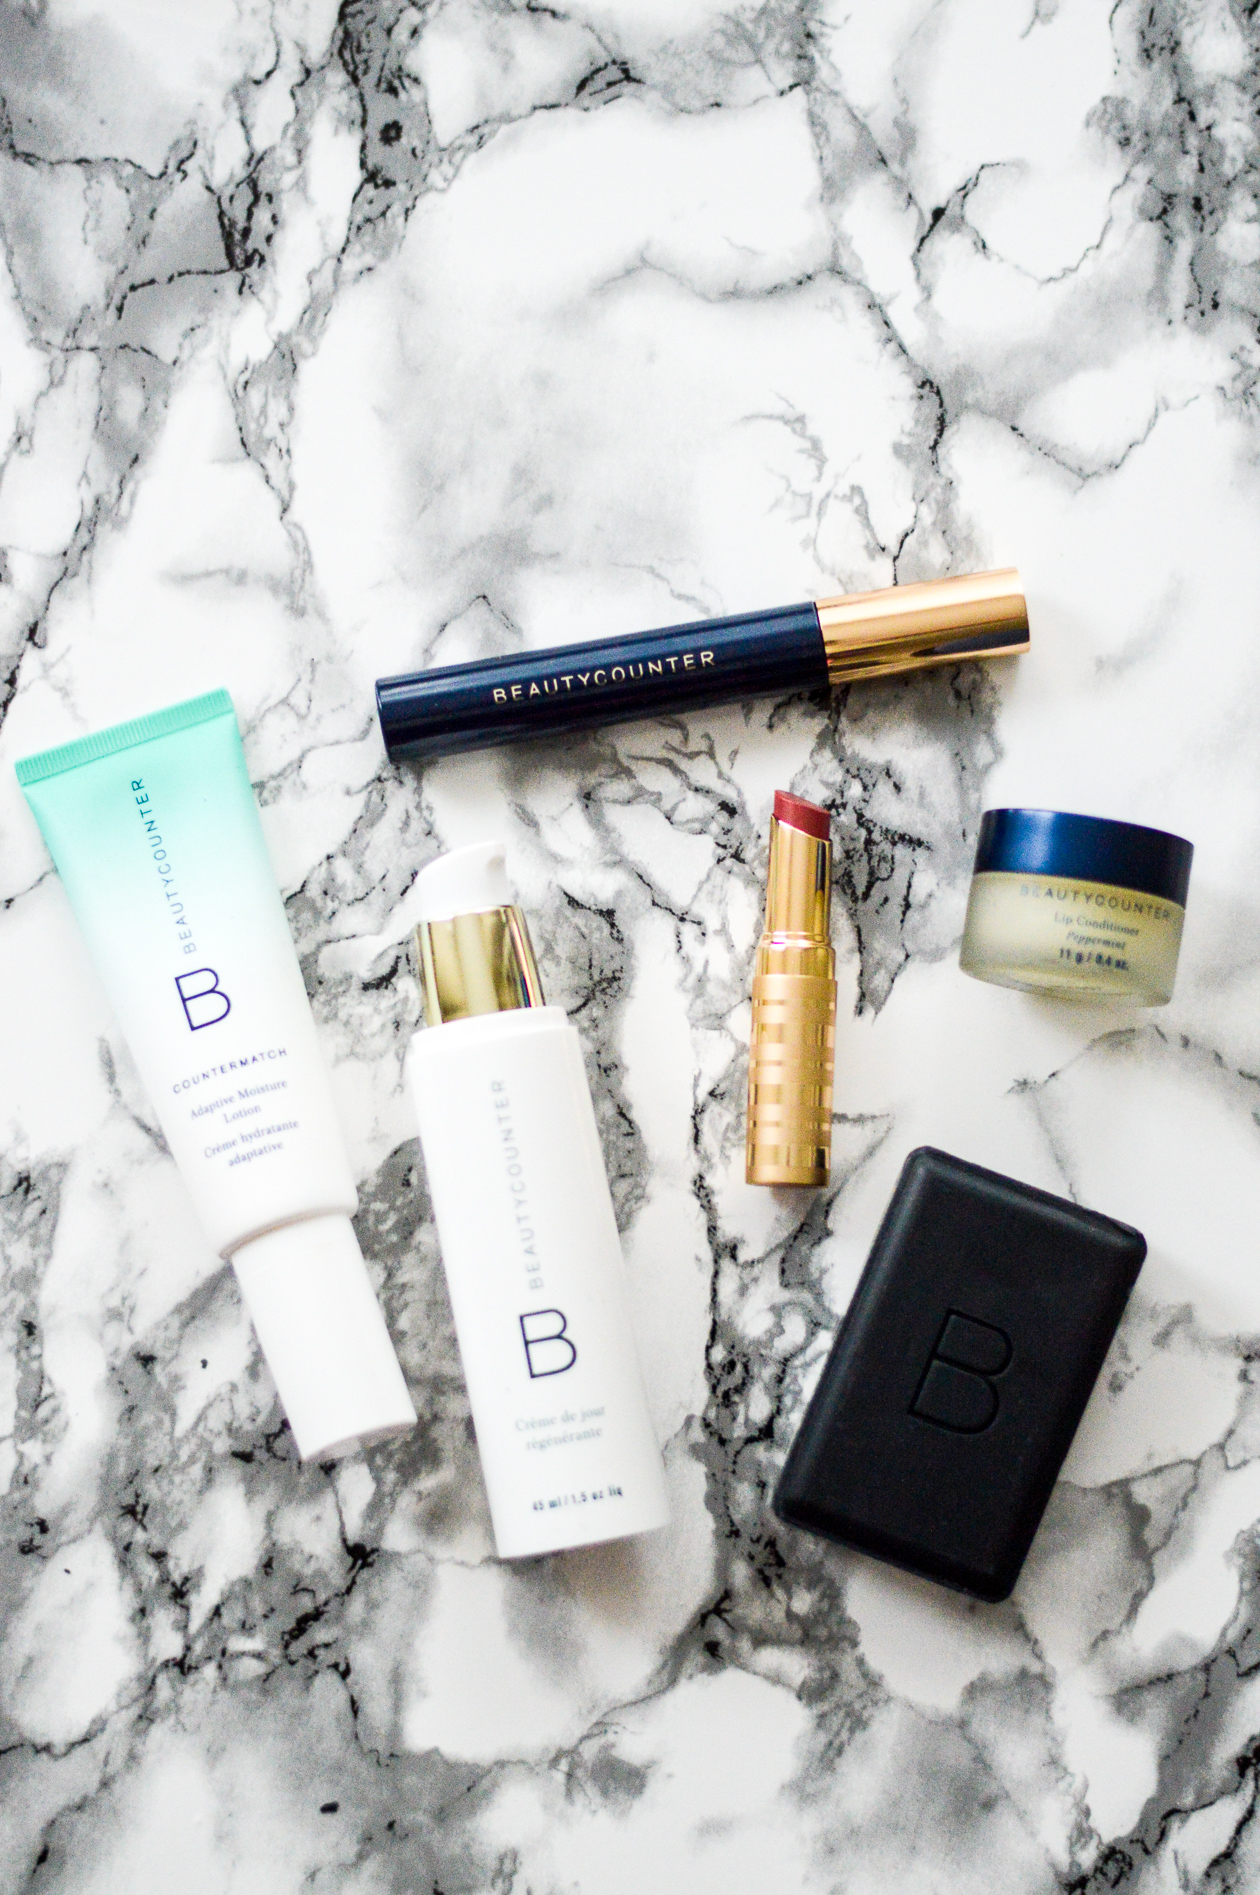 My Favorite Beautycounter Products - DC Girl in Pearls